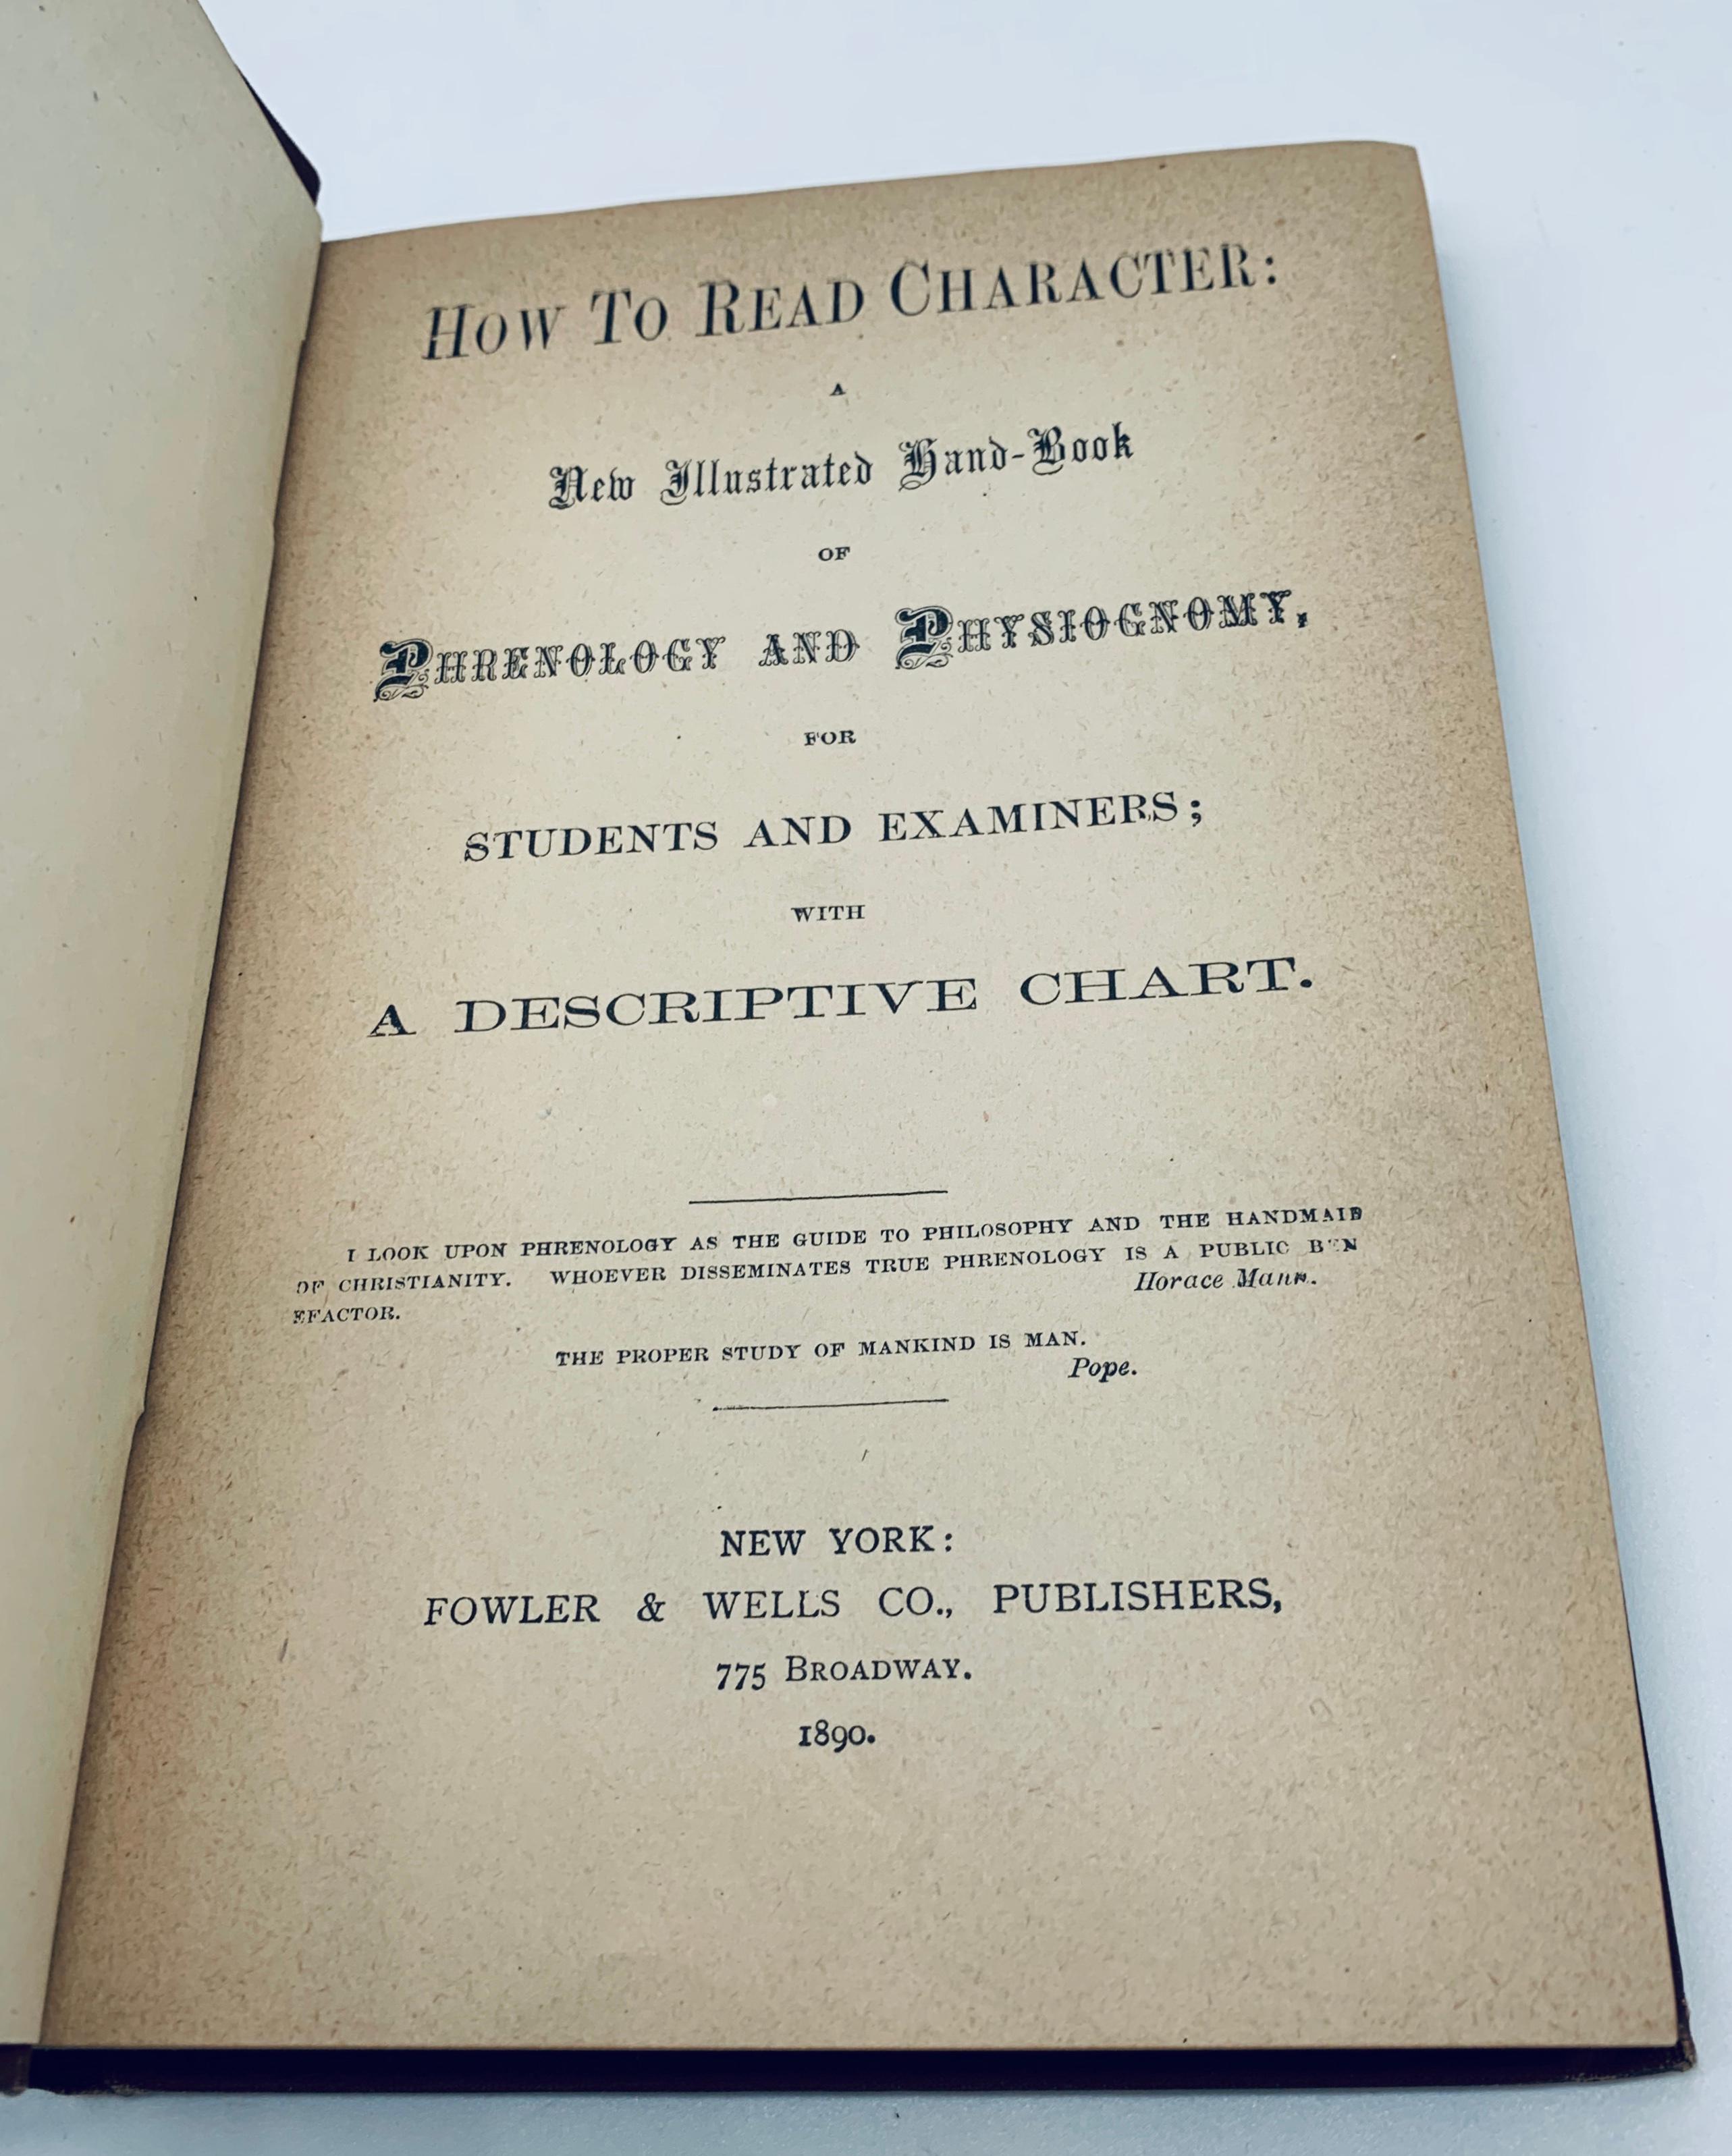 How to Read Character in Handwriting (1890) PHRENOLOGY